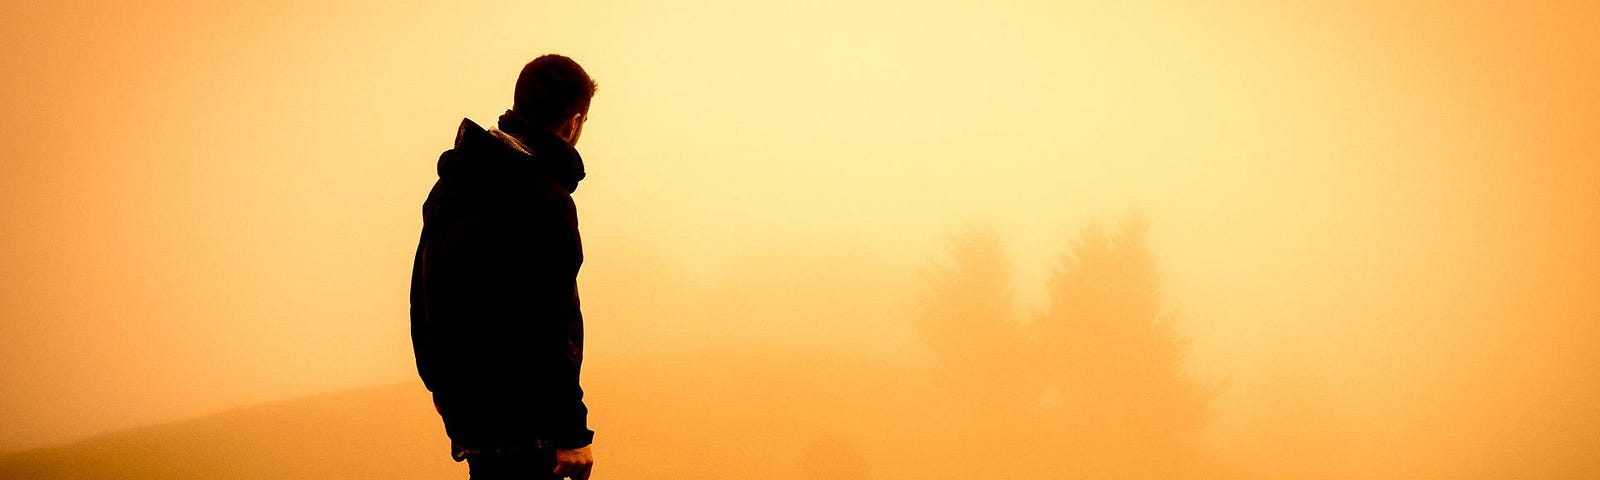 A person wearing a coat turns away from the camera toward the orange sky.